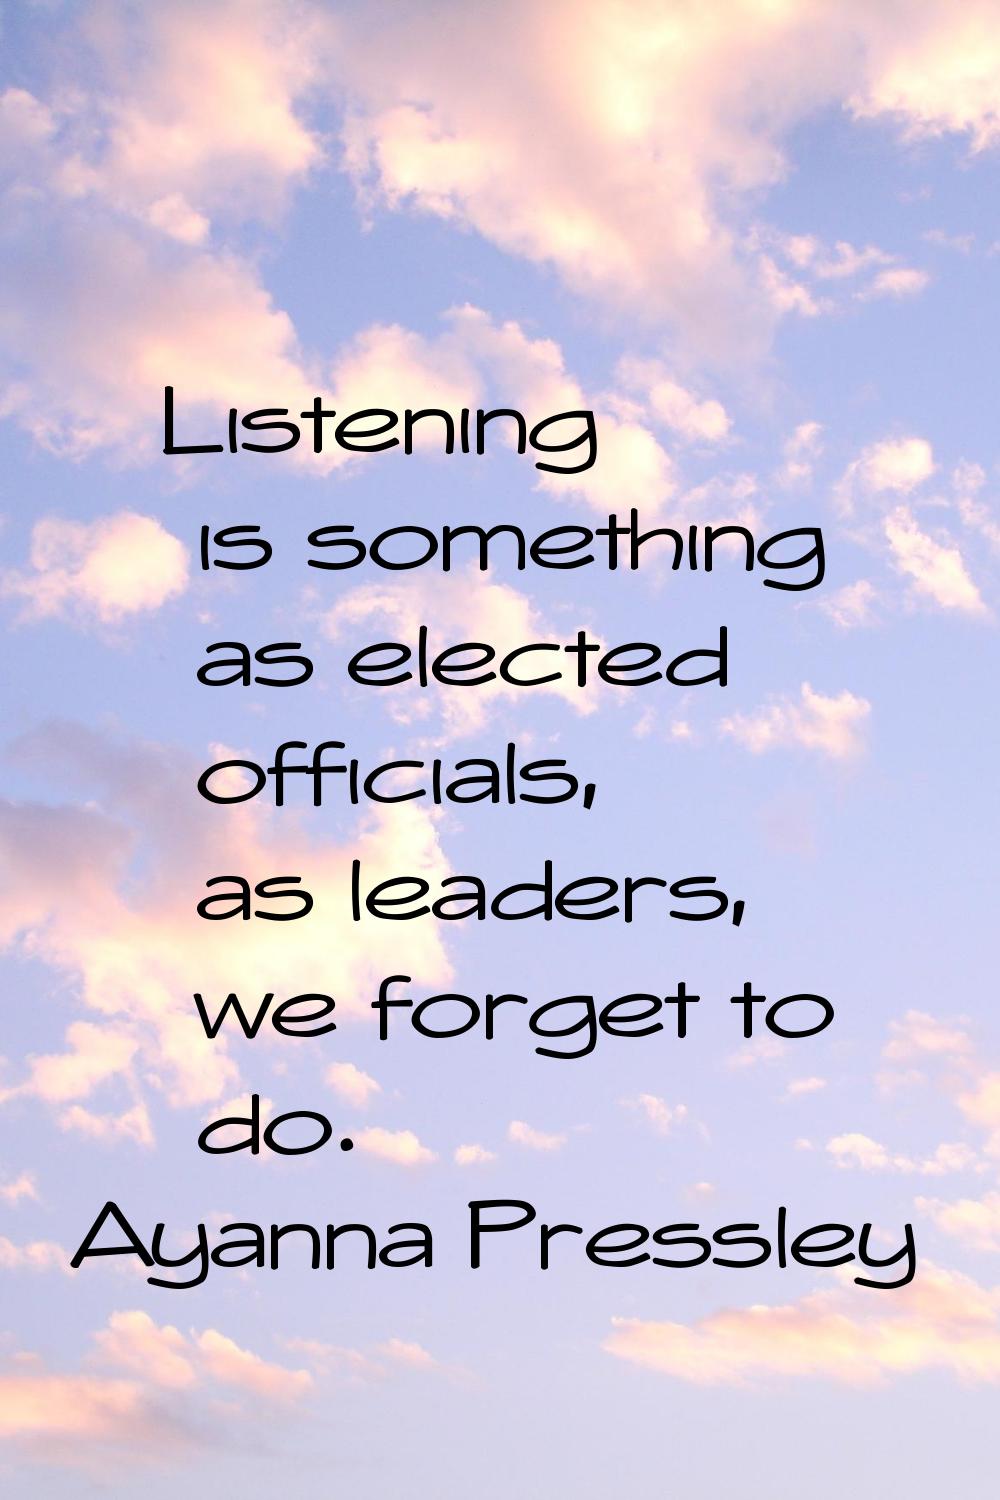 Listening is something as elected officials, as leaders, we forget to do.